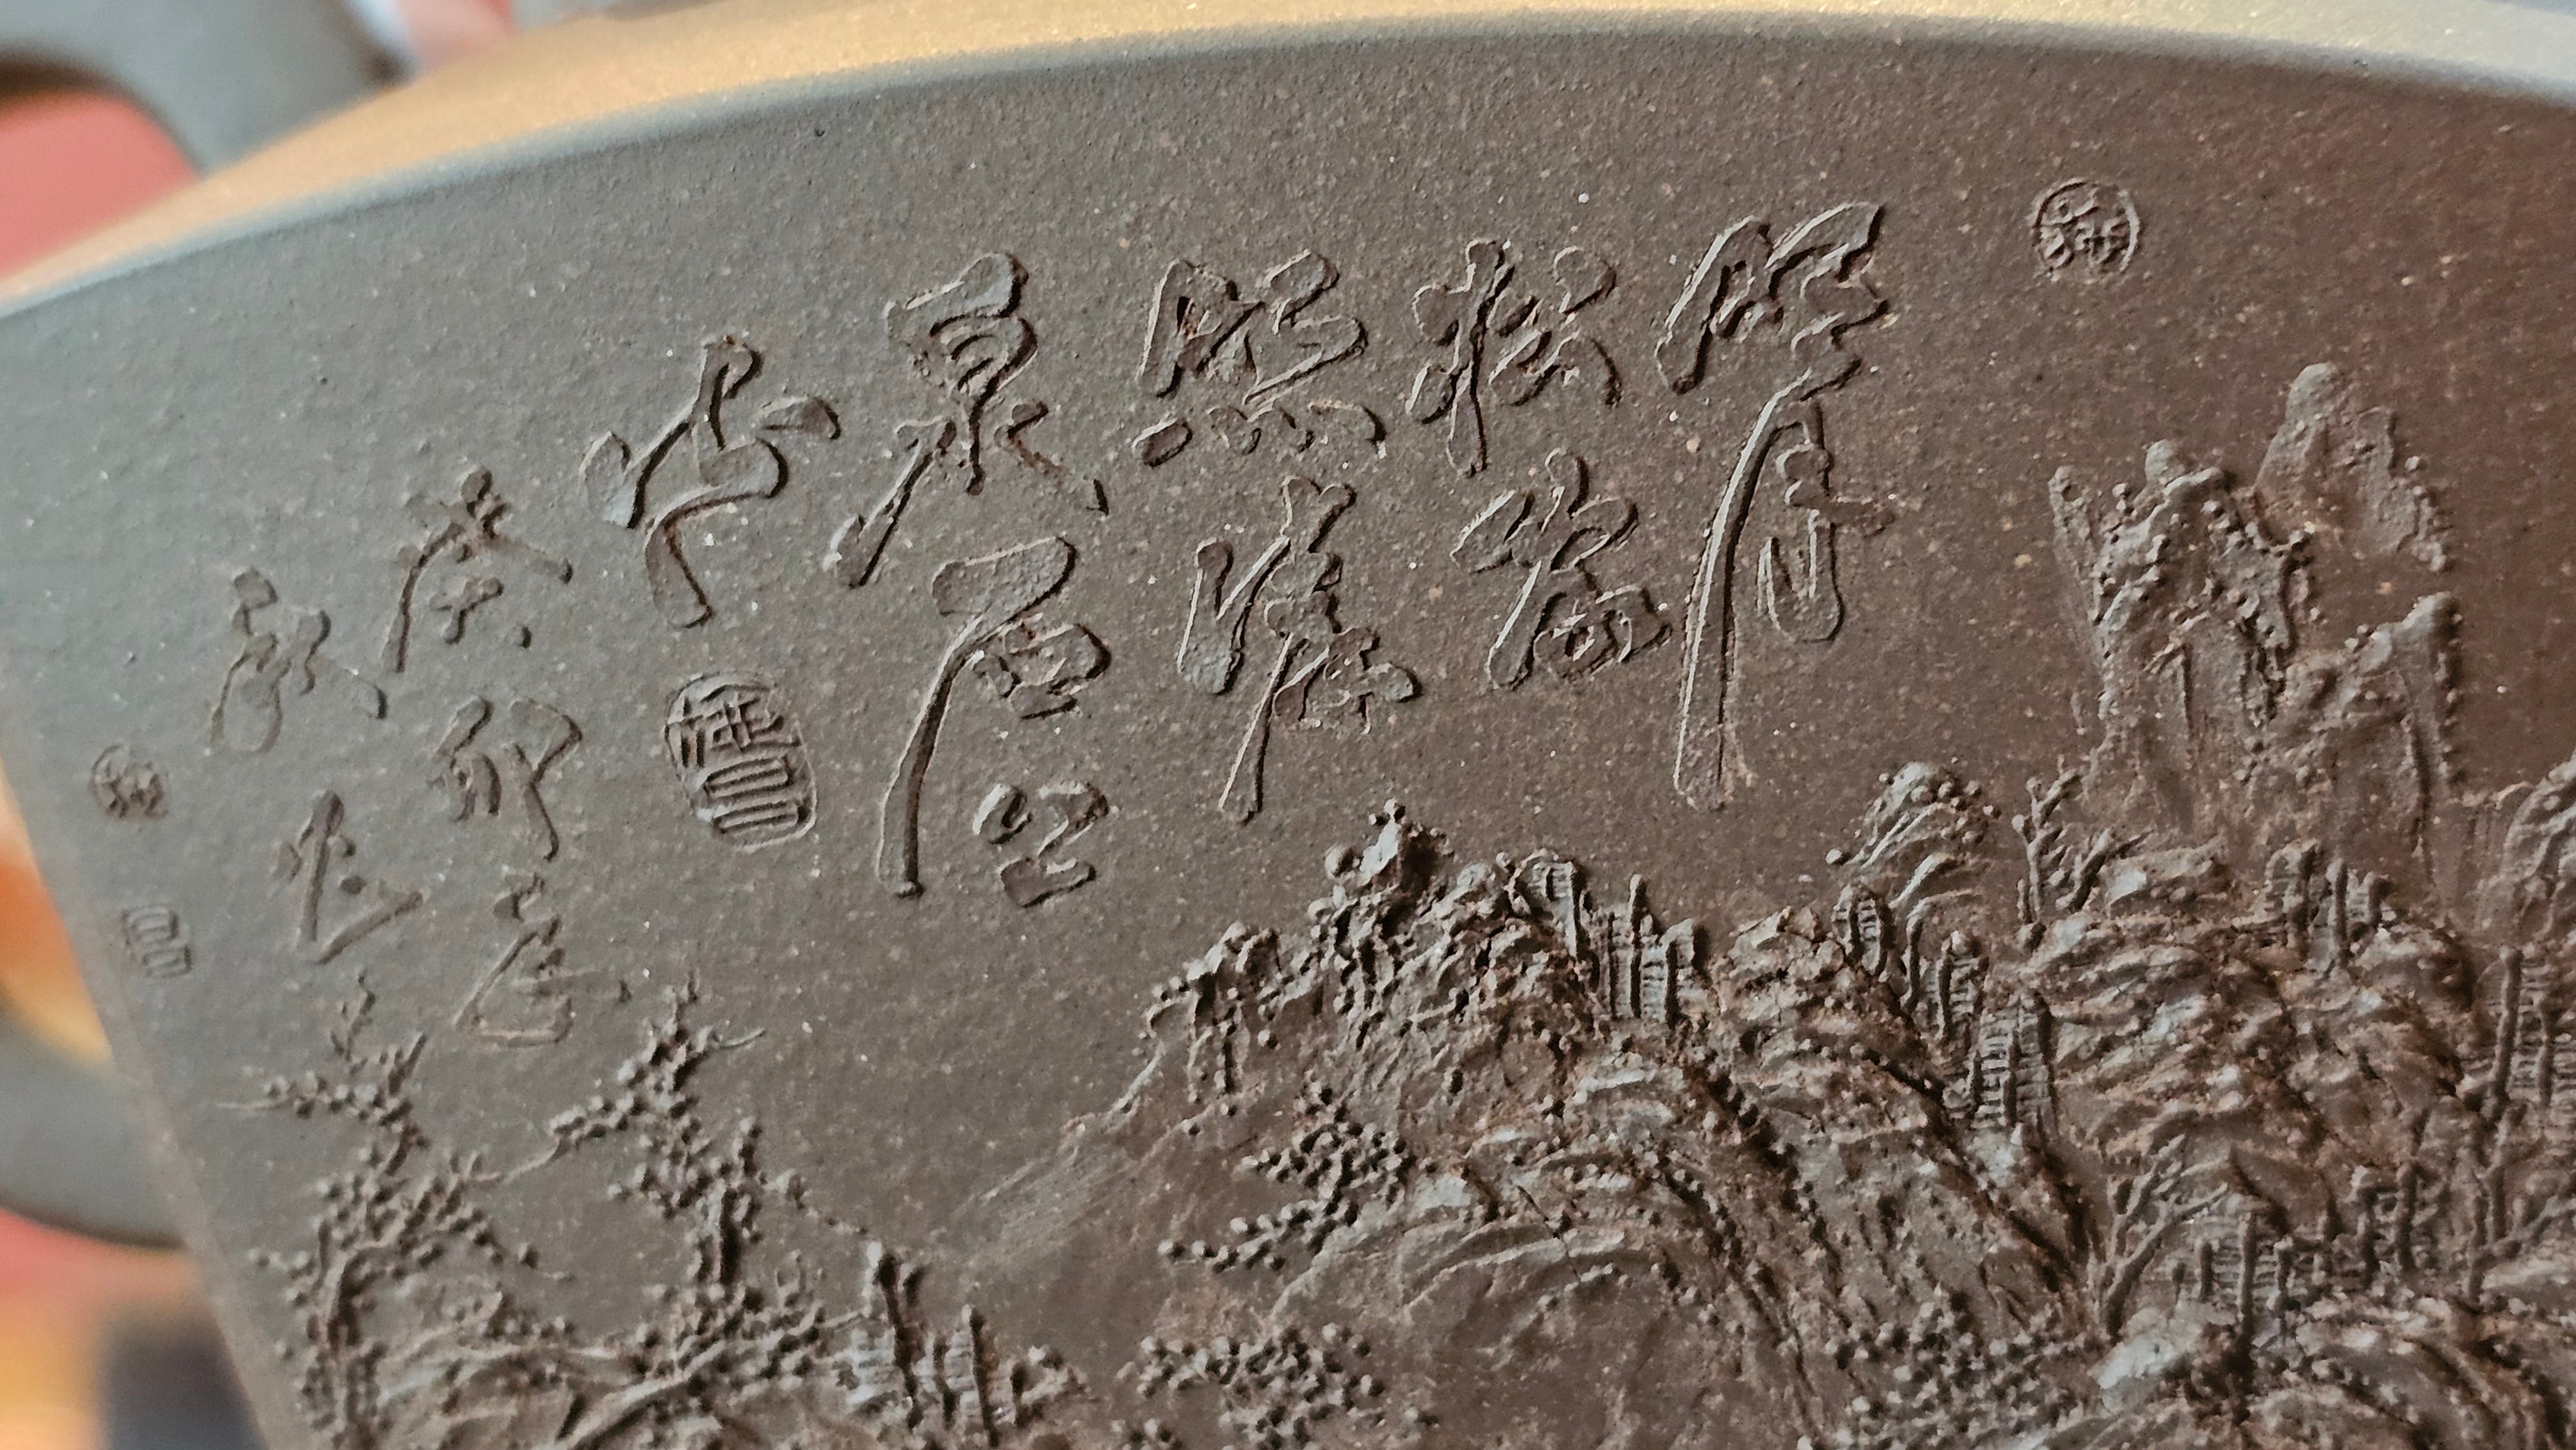 Ming Yuan Fan Configuration 鸣远扇形 by L2A Senior Consummate Master Artist Yuan Hui 高级振兴技艺师-袁辉, collaboration with Master 施昌 Shi Chang 泥绘 Clay Sculpting.  Single Color Clay Sculpted Version.  Special Commission by Ms S.Espitia from The U.S.